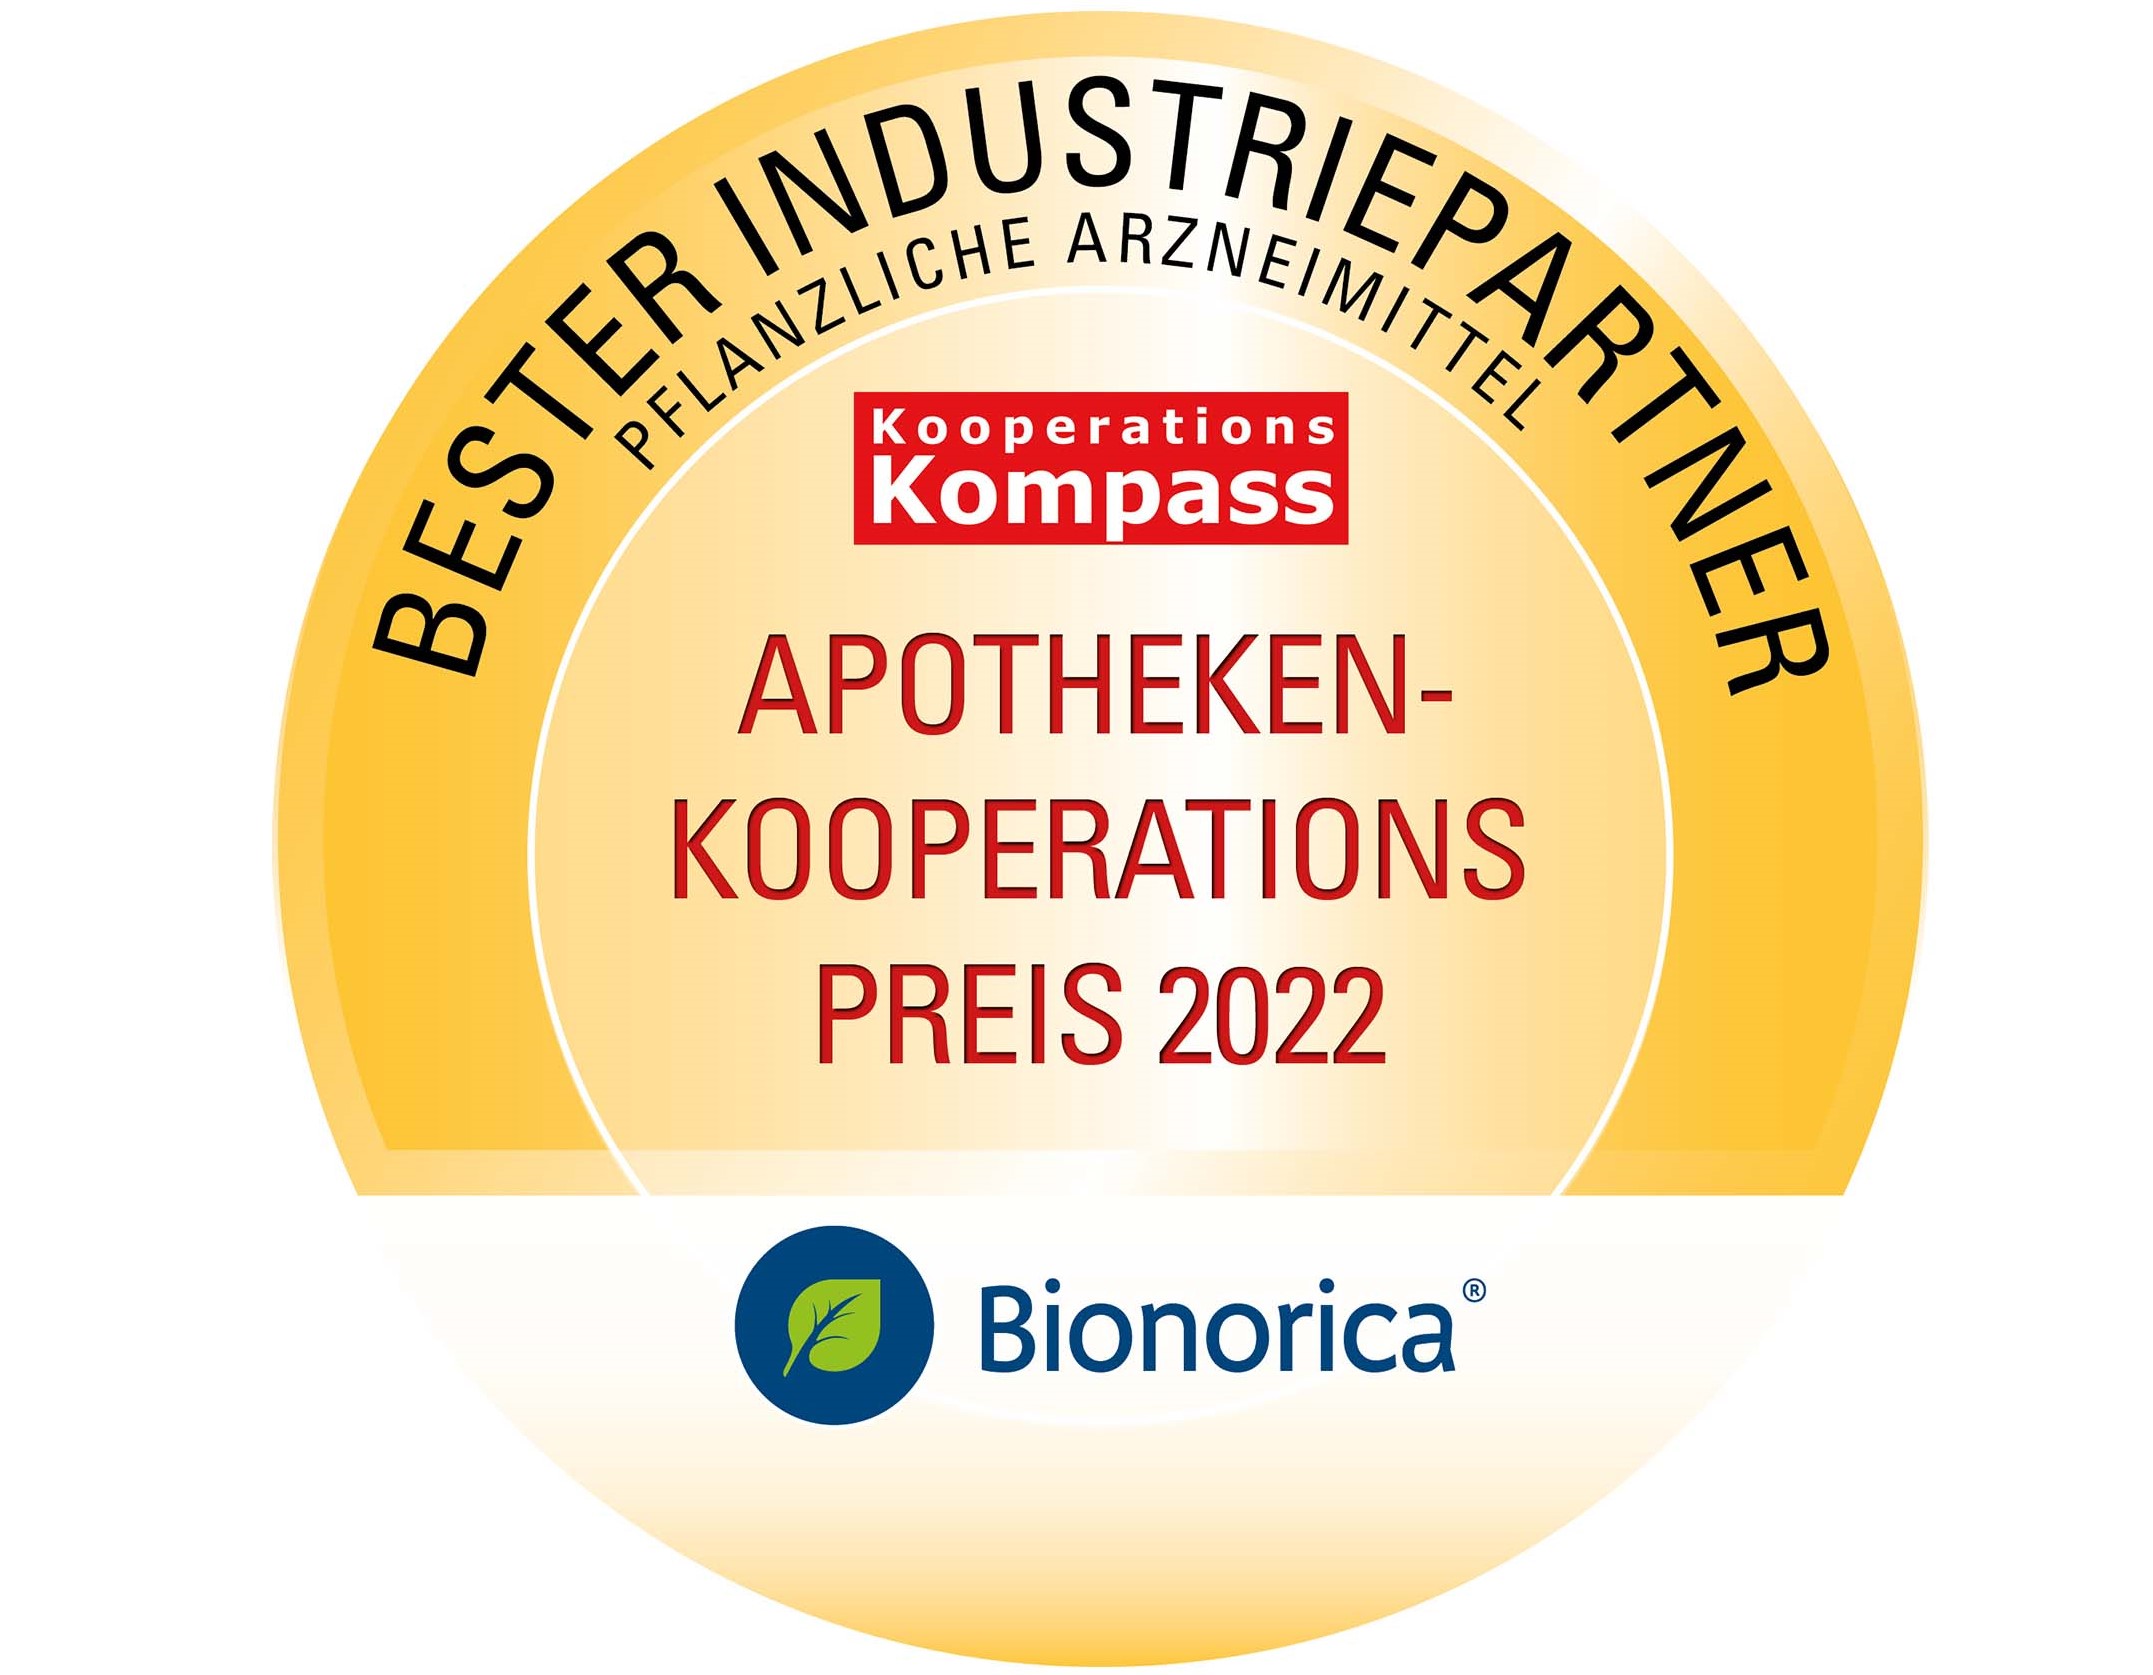 Bionorica is once again "Best Industrial Partner for Herbal Medicinal Products"